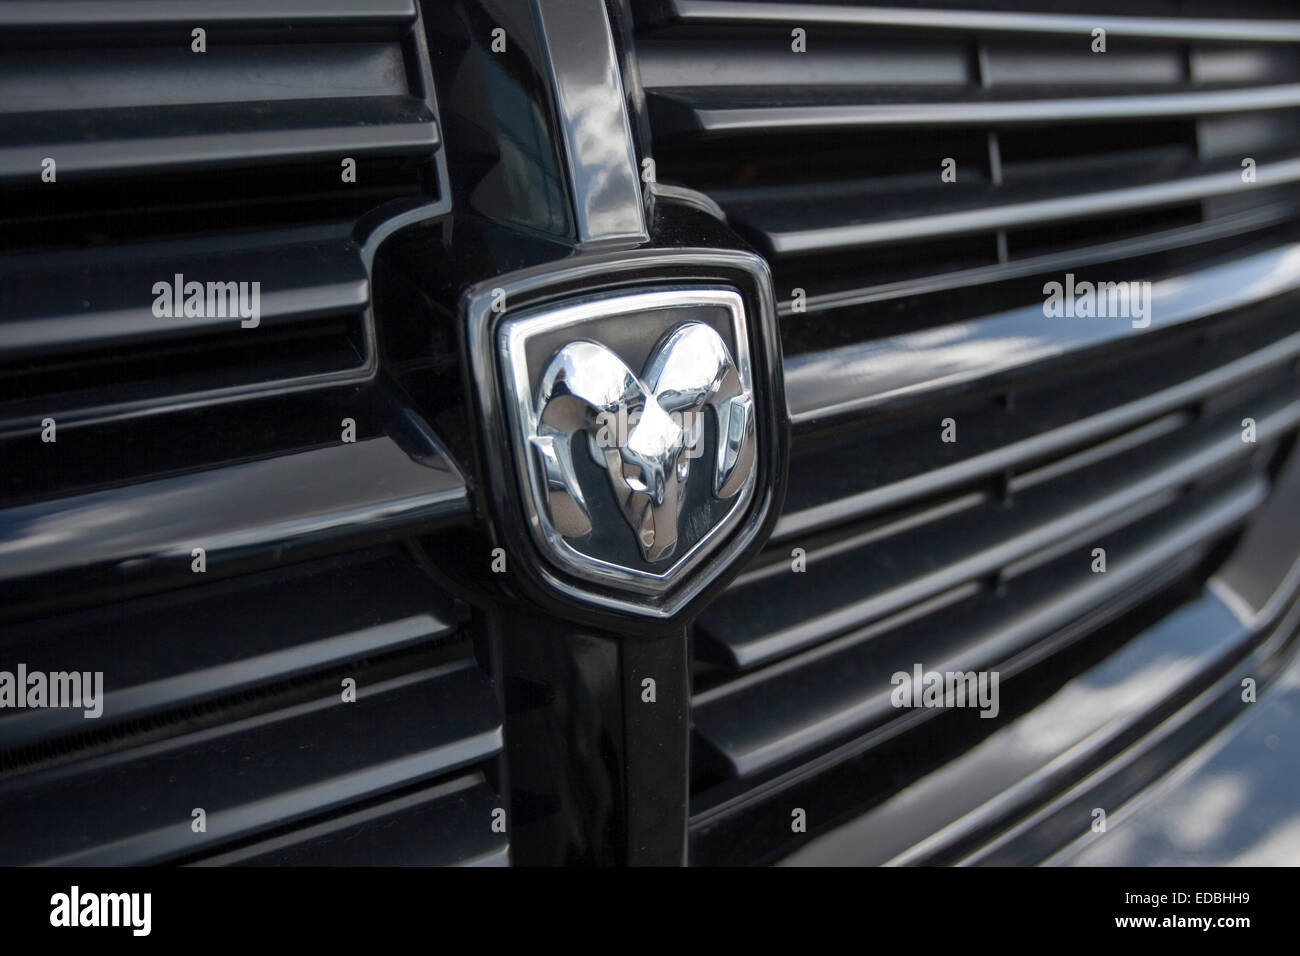 The Dodge emblem on the front of a black pick-up truck Stock Photo